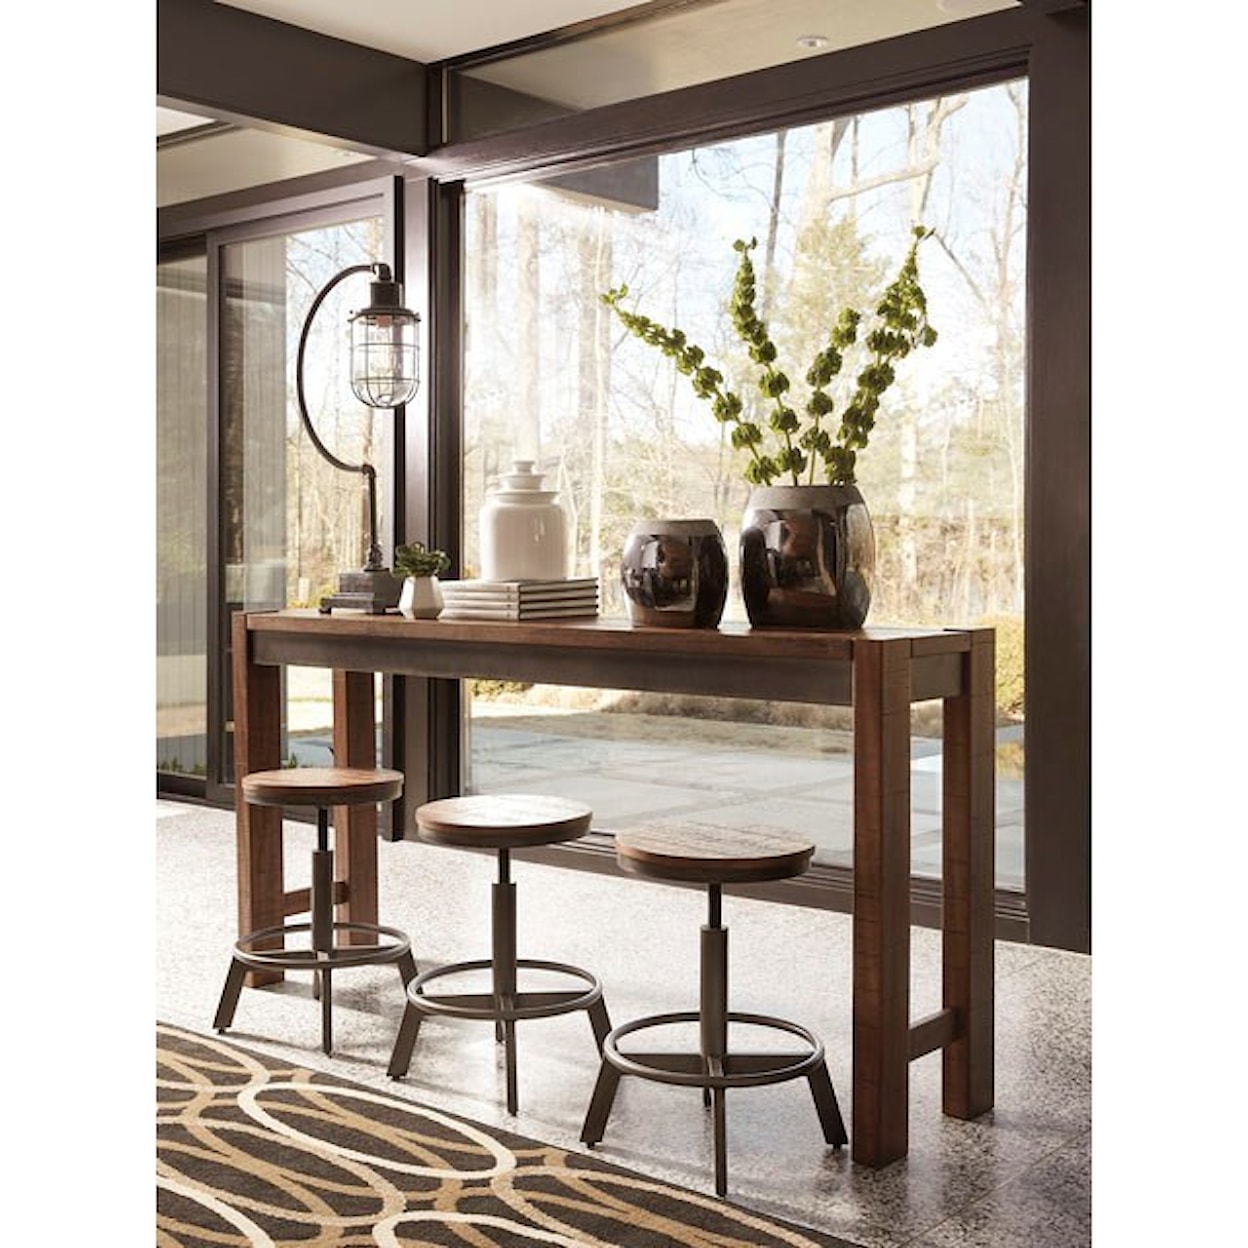 Signature Design by Ashley Torjin 4pc Dining Room Group